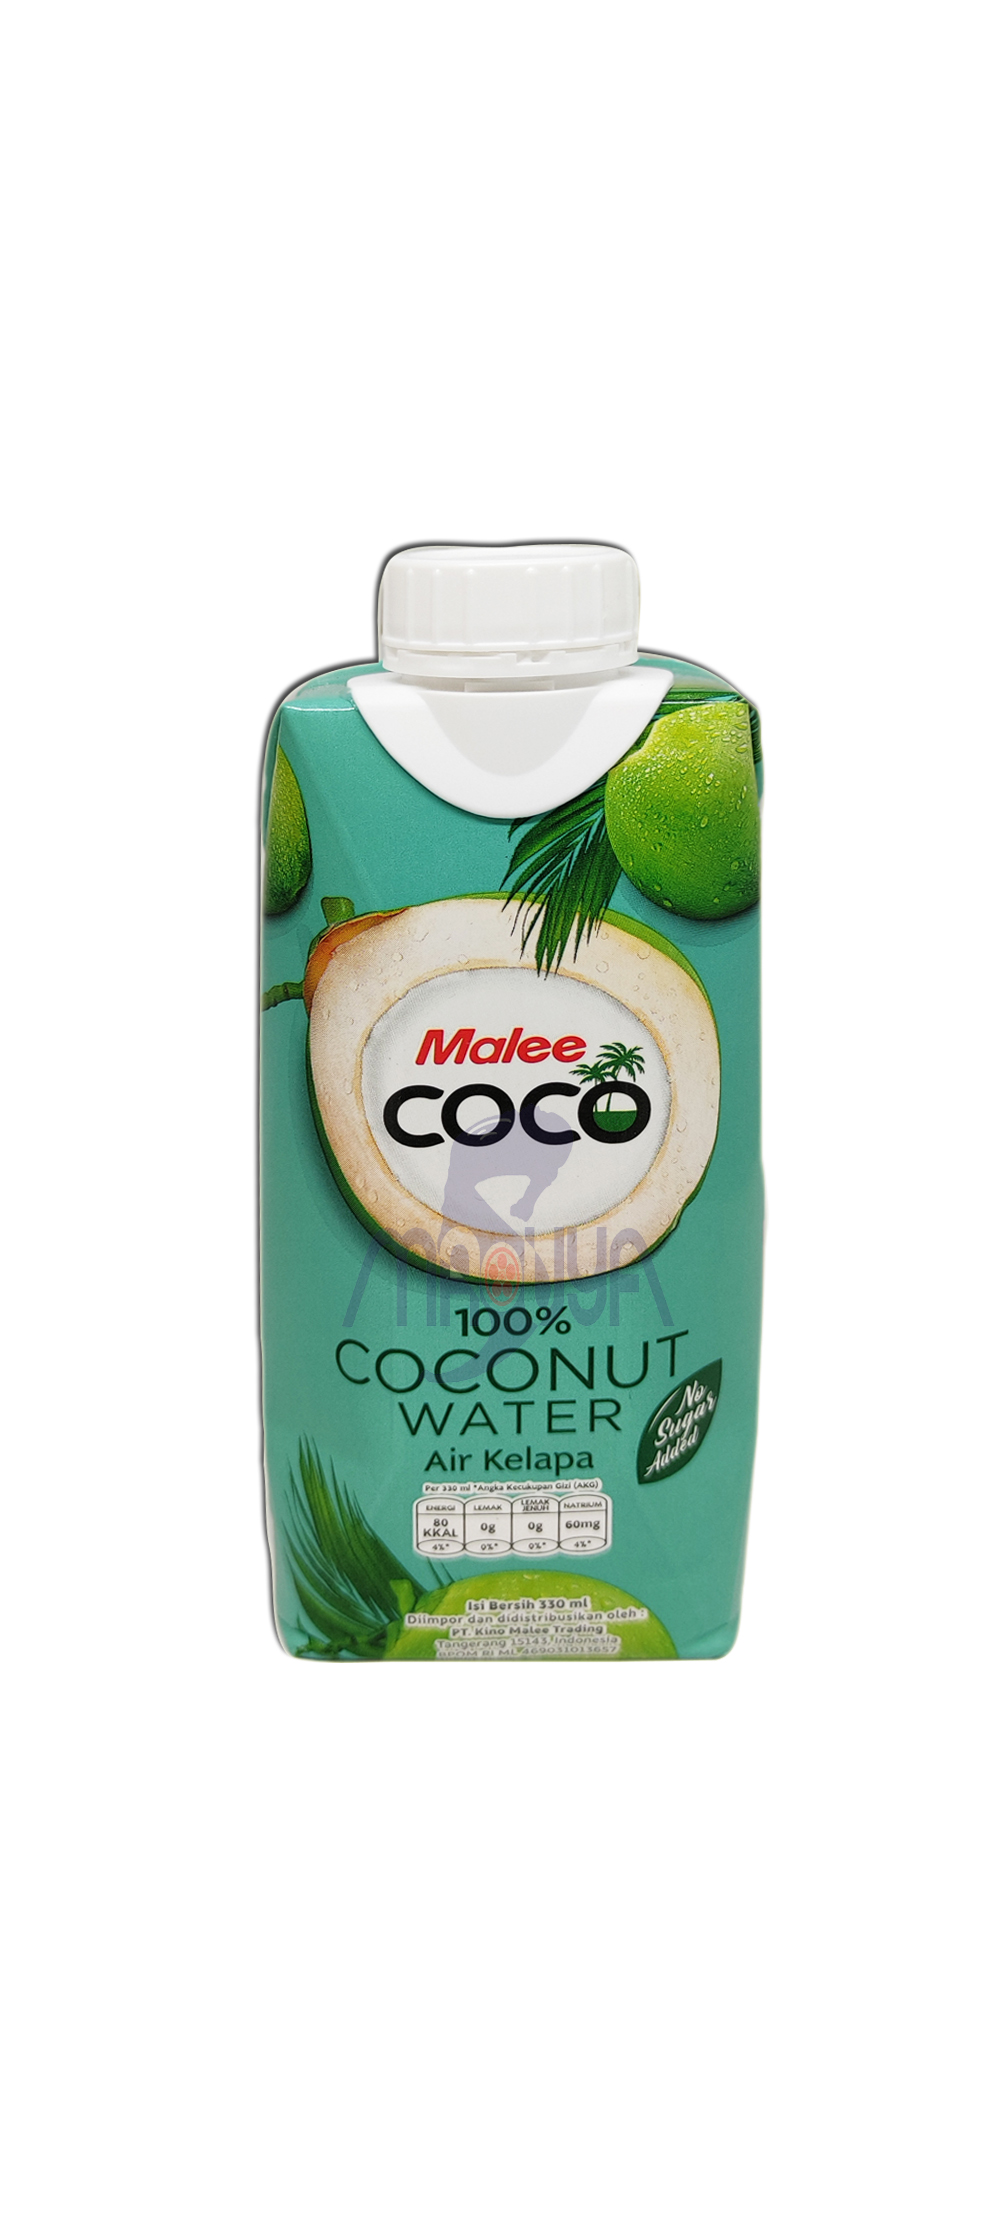 Malee Coco 100% Coconut Water 330 ml